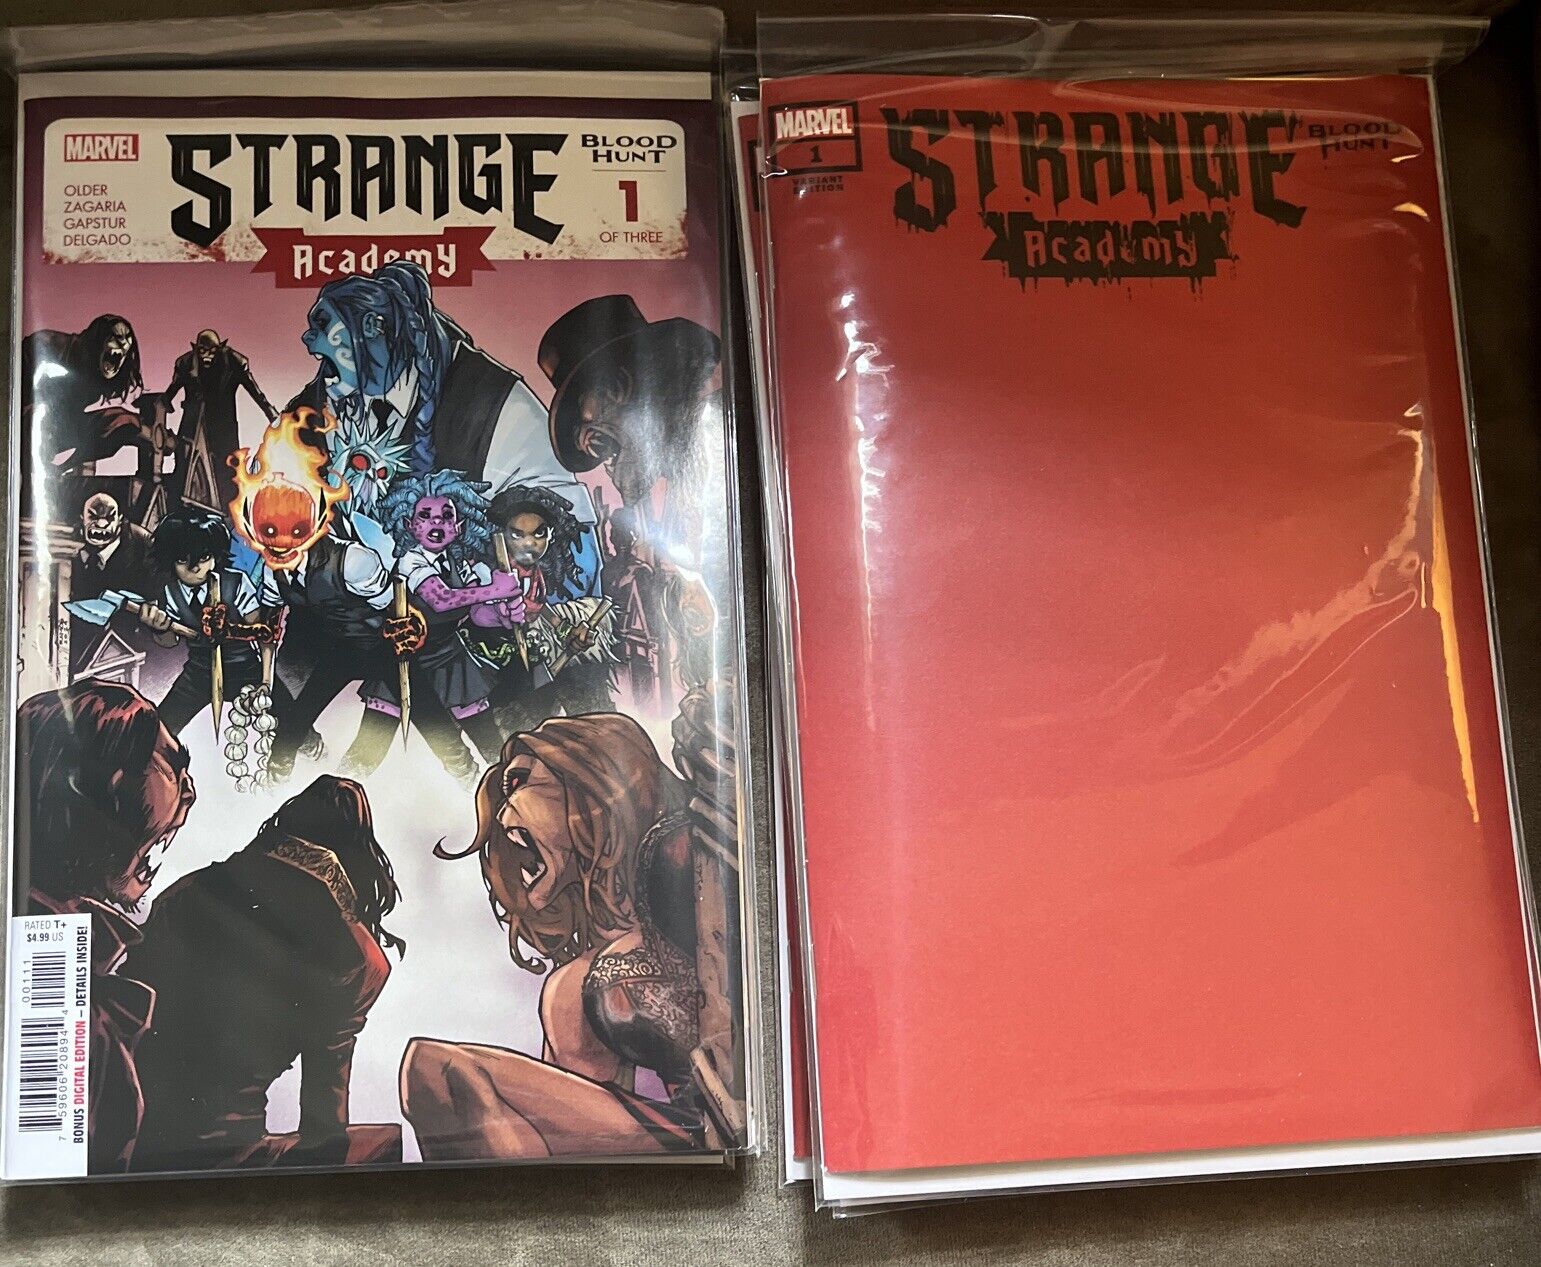 Strange Academy: Blood Hunt #1 Cover A And B Set NM-/NM